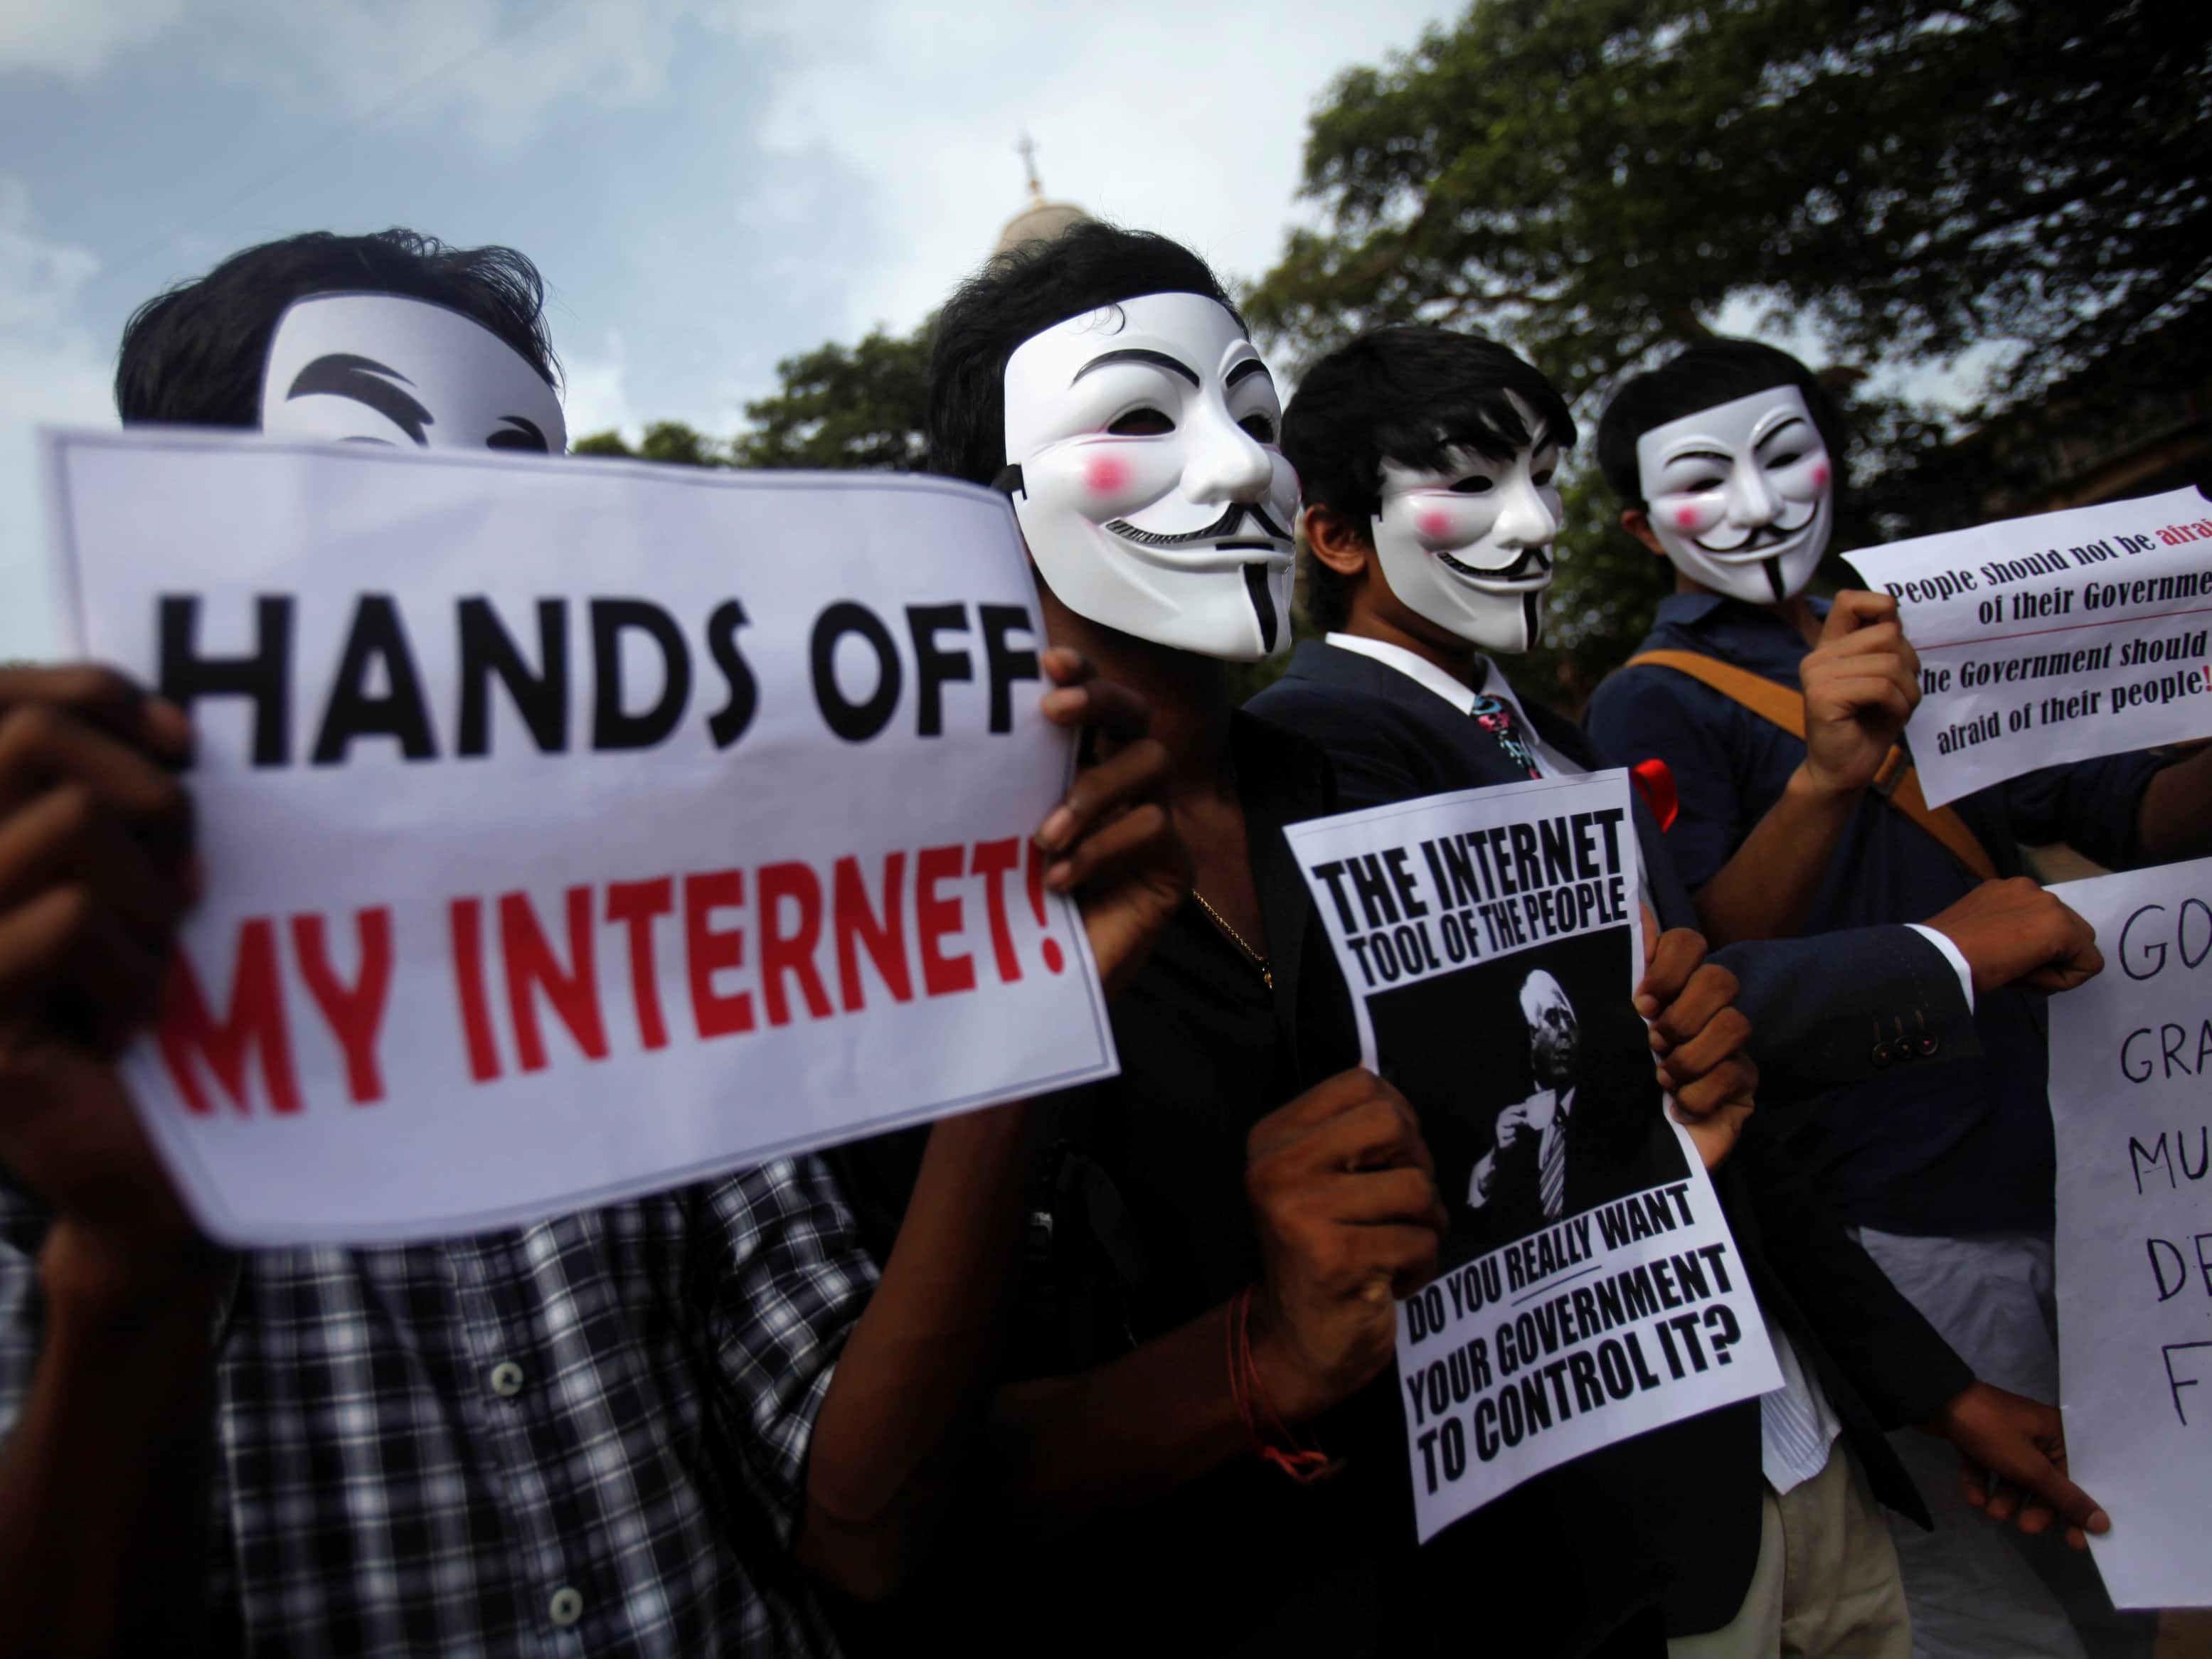 In June 2012, protesters from the Anonymous India group of hackers demonstrated in Mumbai against laws they said gave the government control over censorship of Internet usage, REUTERS/Vivek Prakash